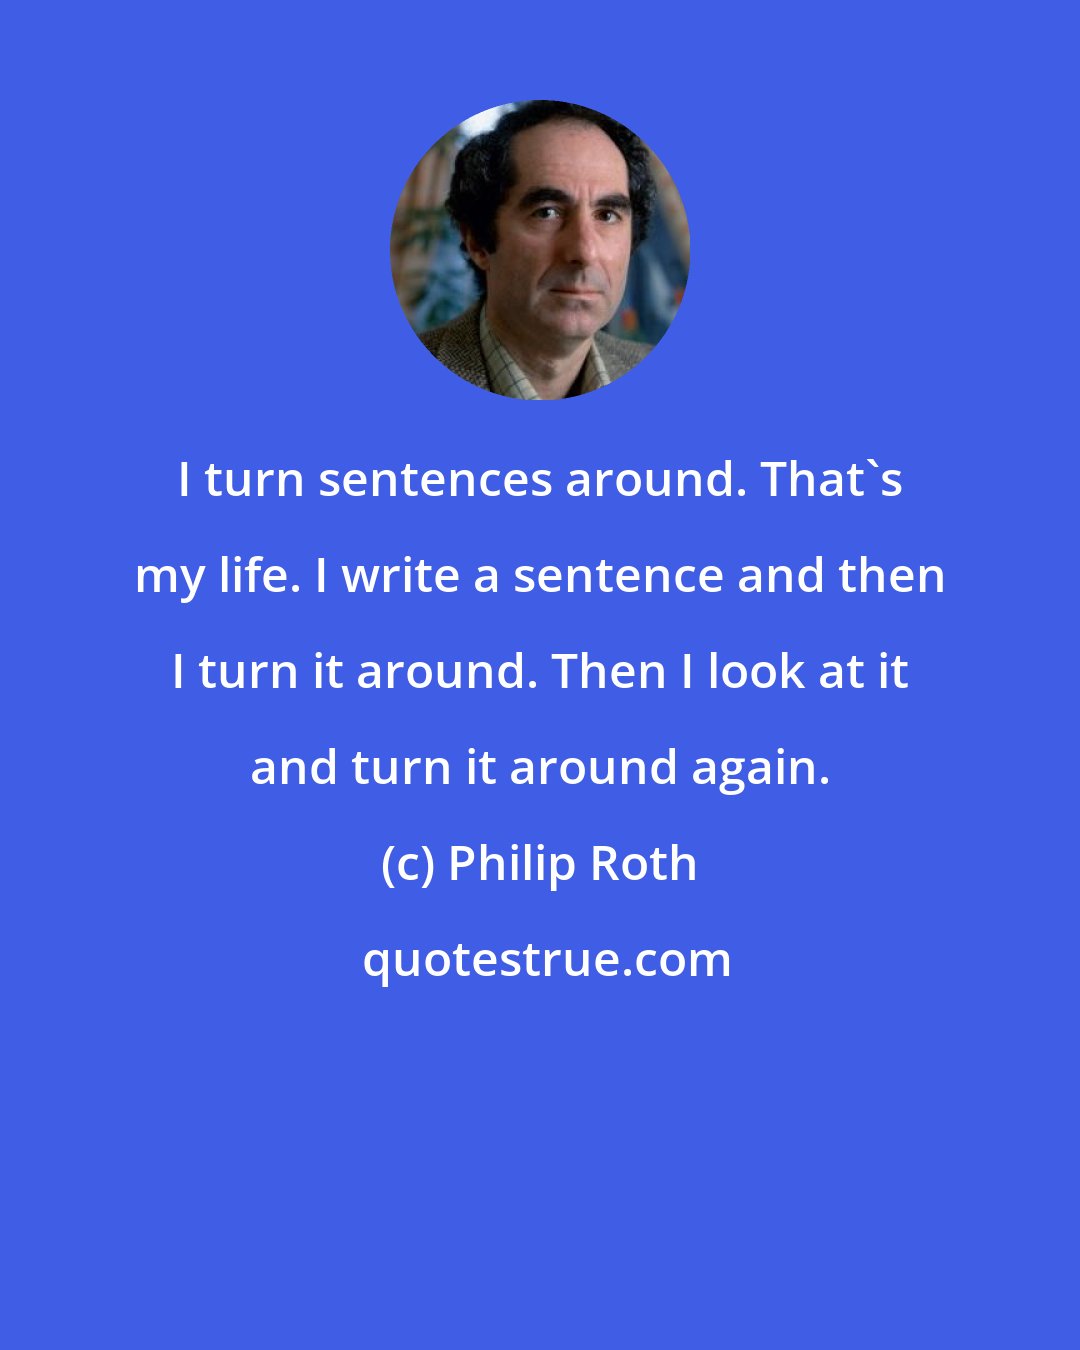 Philip Roth: I turn sentences around. That's my life. I write a sentence and then I turn it around. Then I look at it and turn it around again.